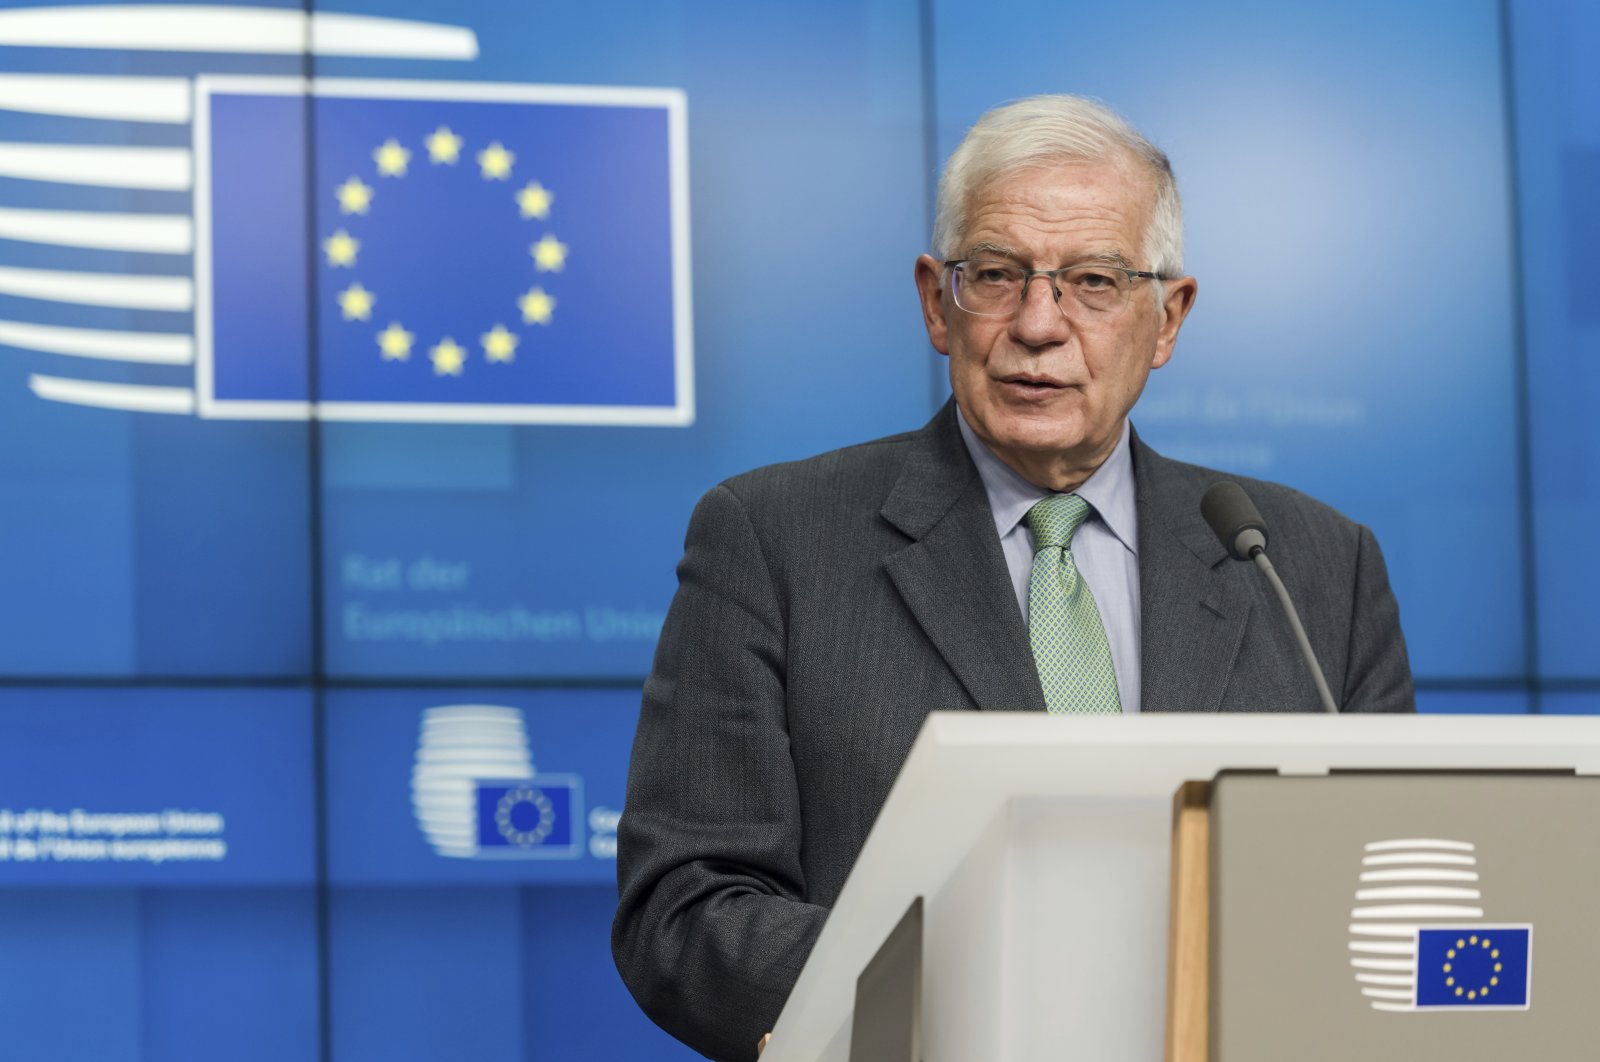 European Union Foreign Policy Chief Josep Borrell speaks during a media conference after a round table meeting of the Eastern Partnership at the European Council building in Brussels, Belgium, Nov. 15, 2021. (AP File Photo)